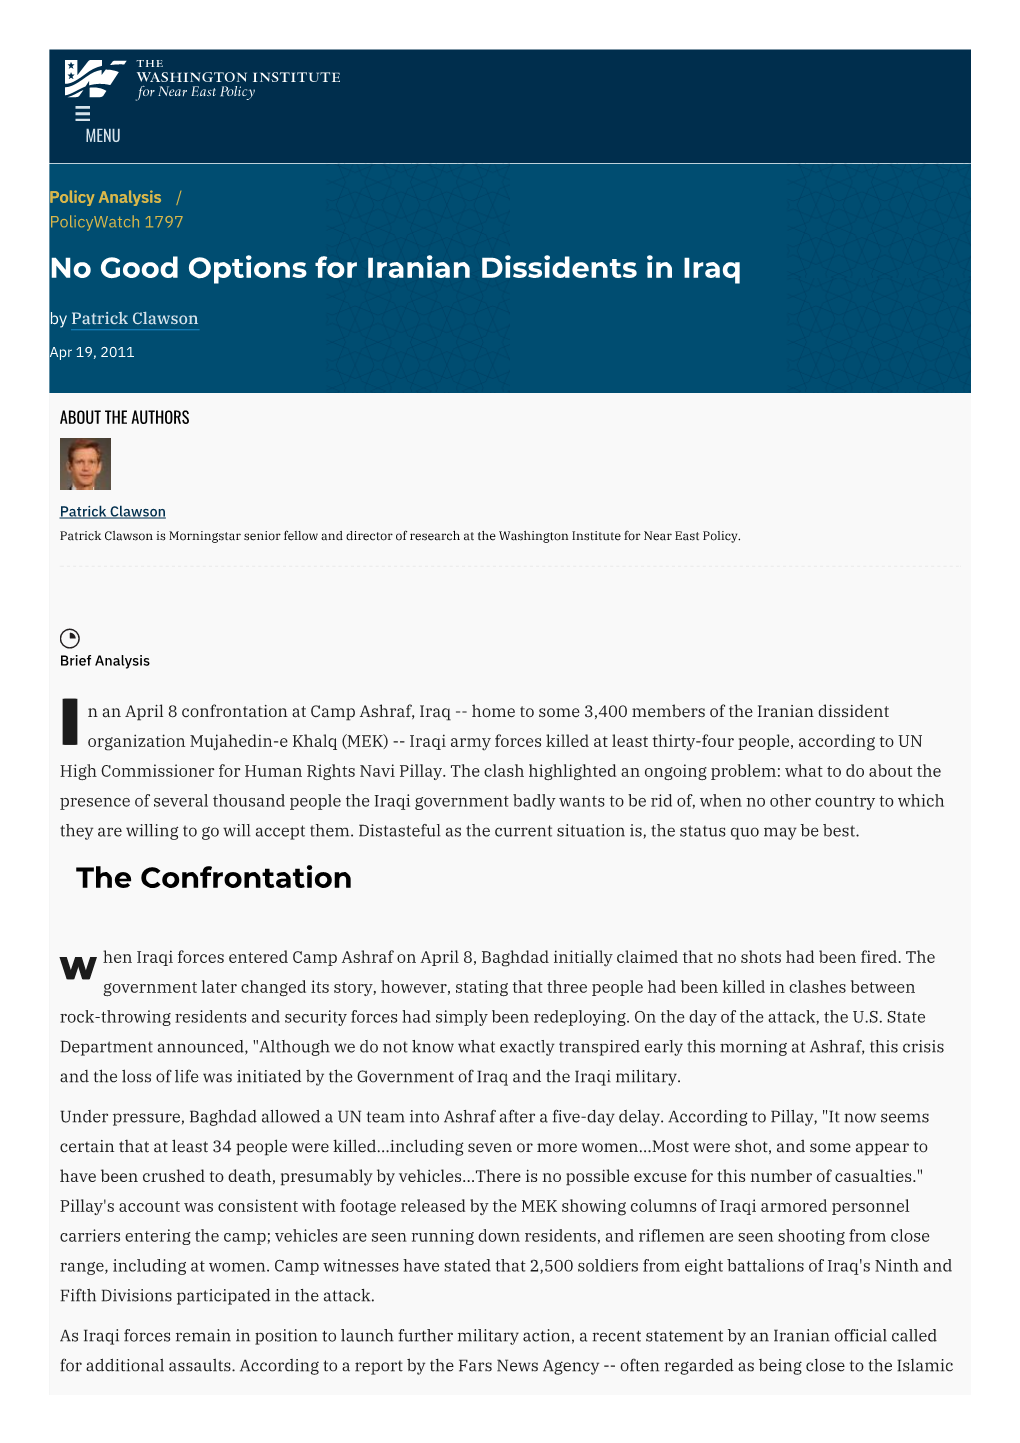 No Good Options for Iranian Dissidents in Iraq | the Washington